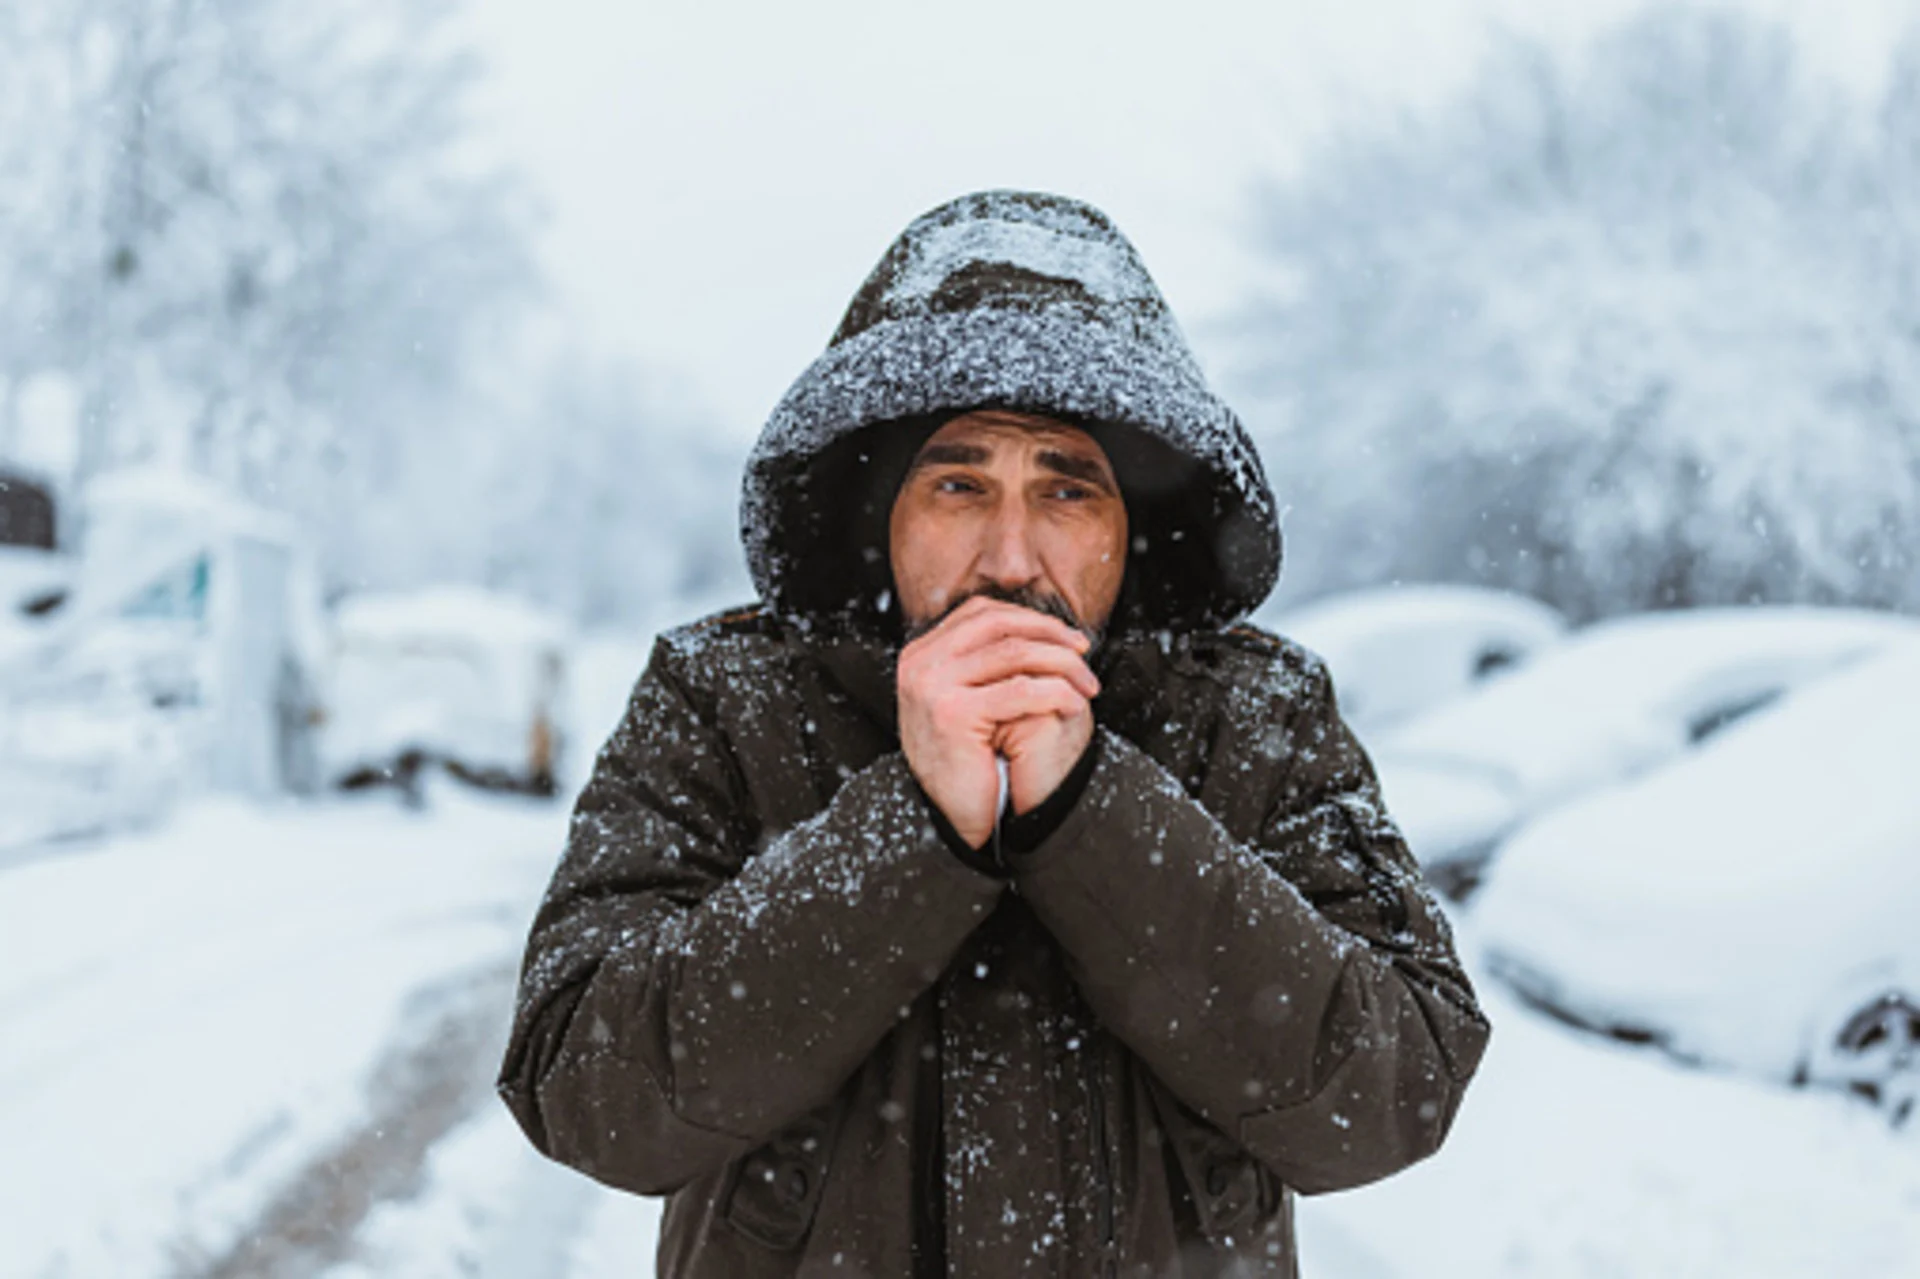 What is wind chill and why does it 'feel' so miserable?